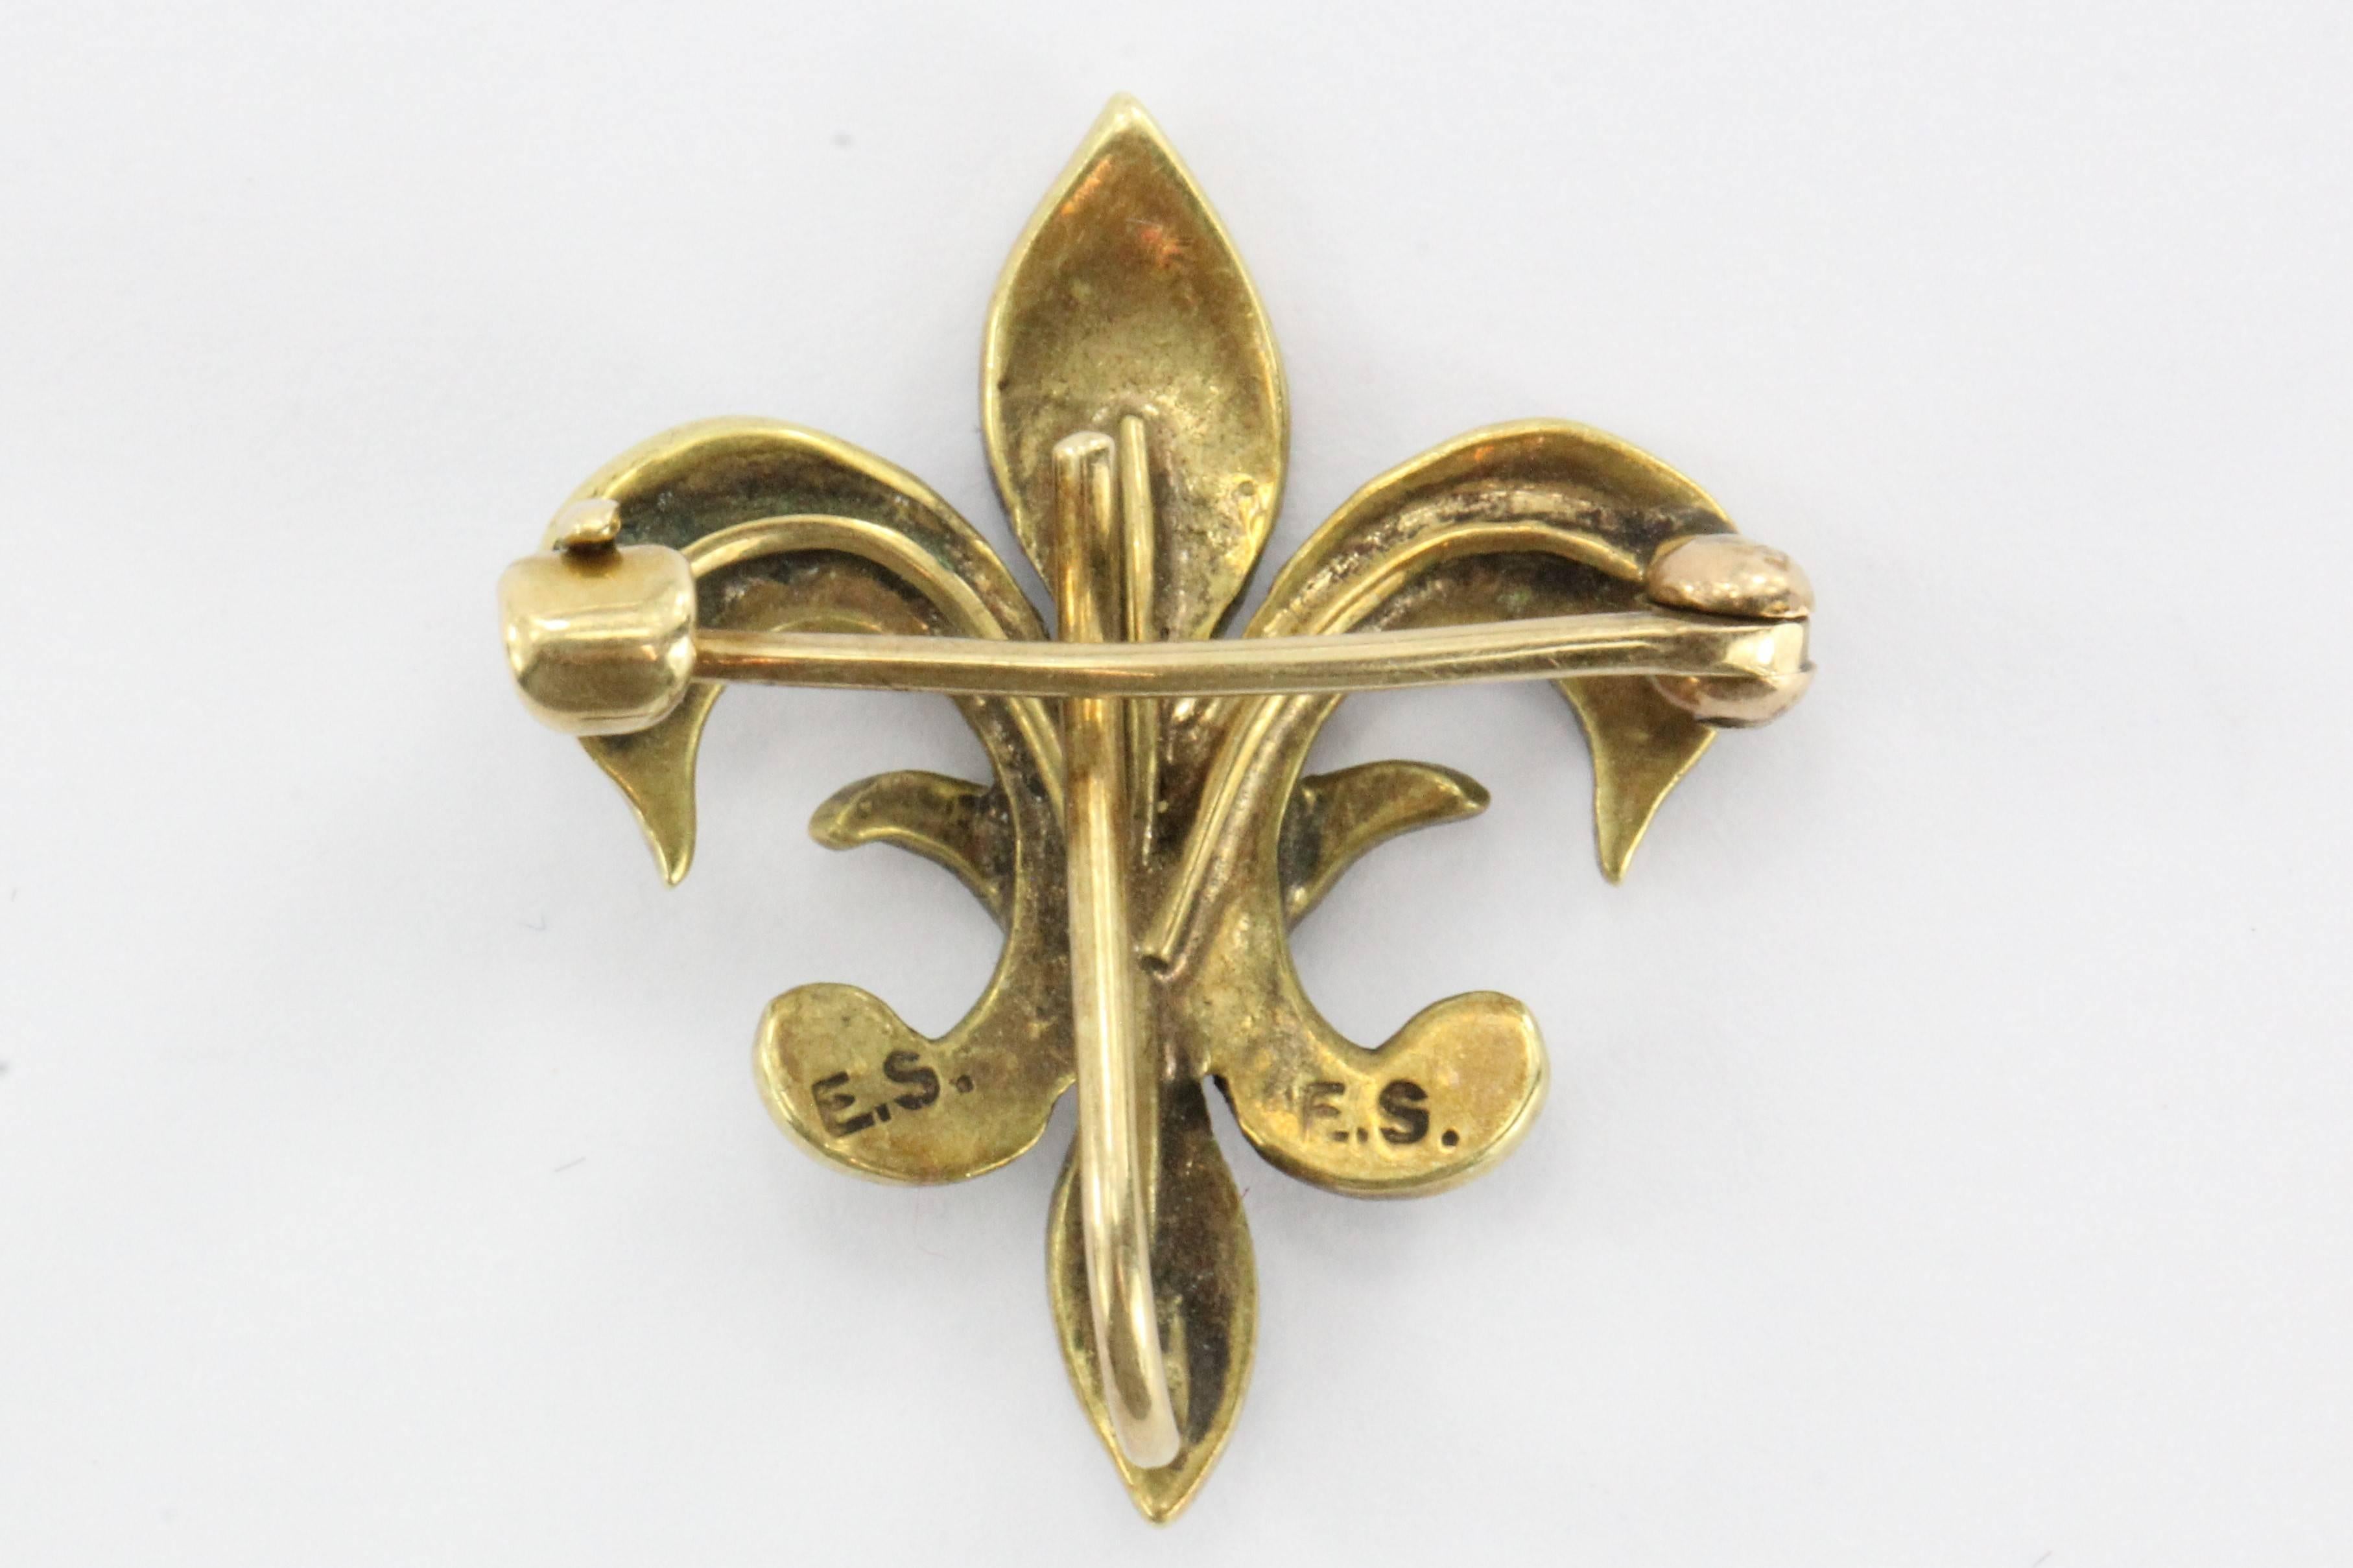 Antique 14K Gold & Seed Pearl Fleur De Lis Pin by Ehrlich & Sinnock. The piece is in excellent all original condition and ready to wear. It is signed E.S. twice on the back which is the makers mark for Ehrlich & Sinnock. They were in business